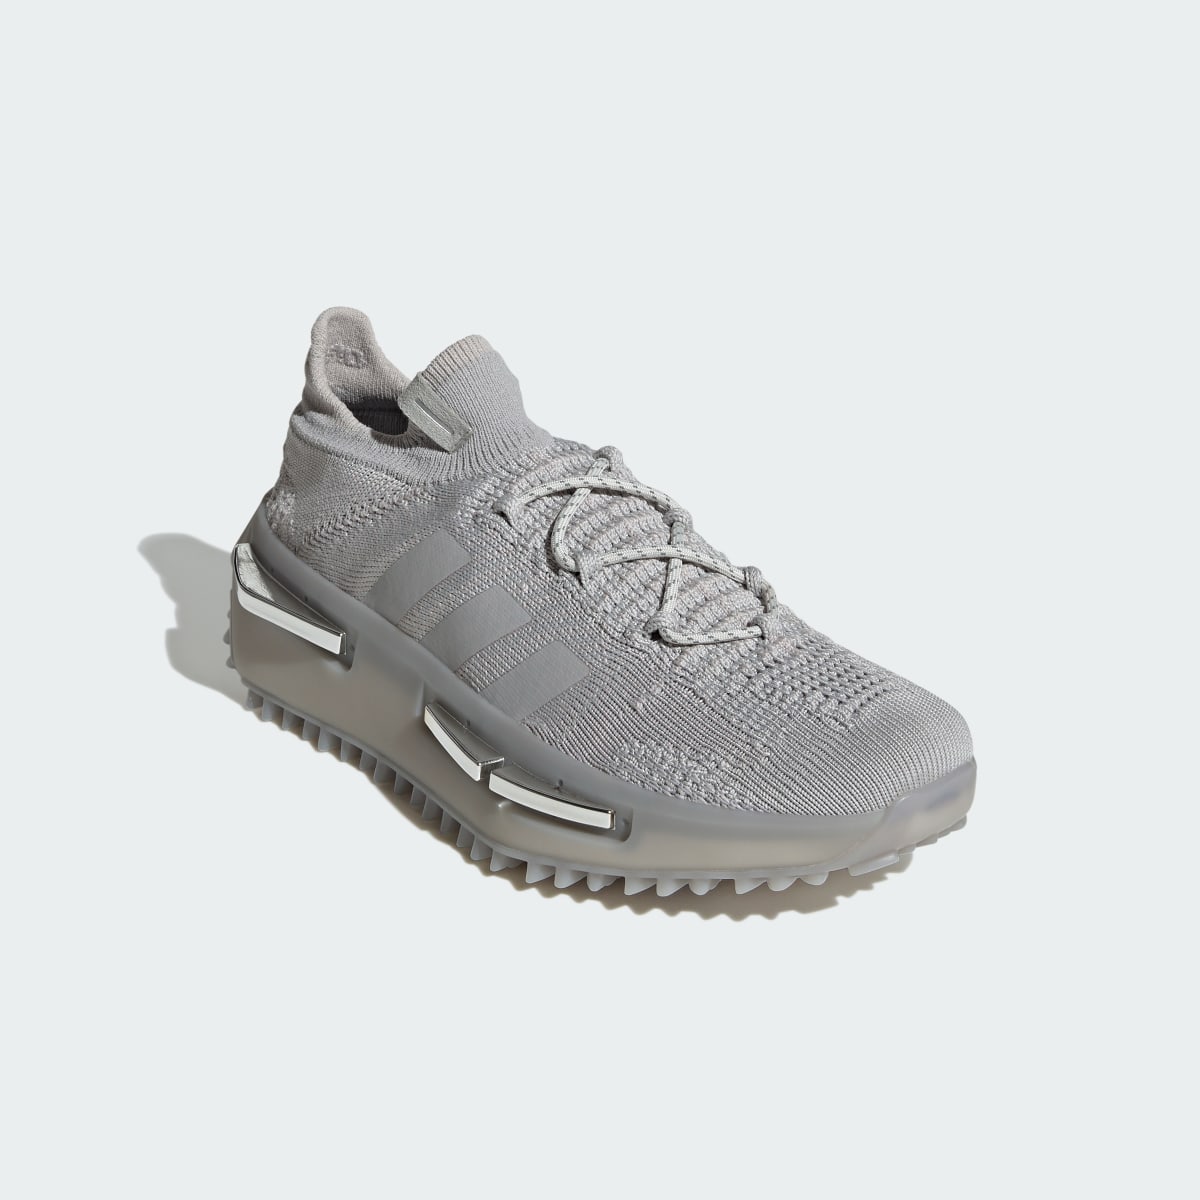 Adidas NMD_S1 Shoes. 5